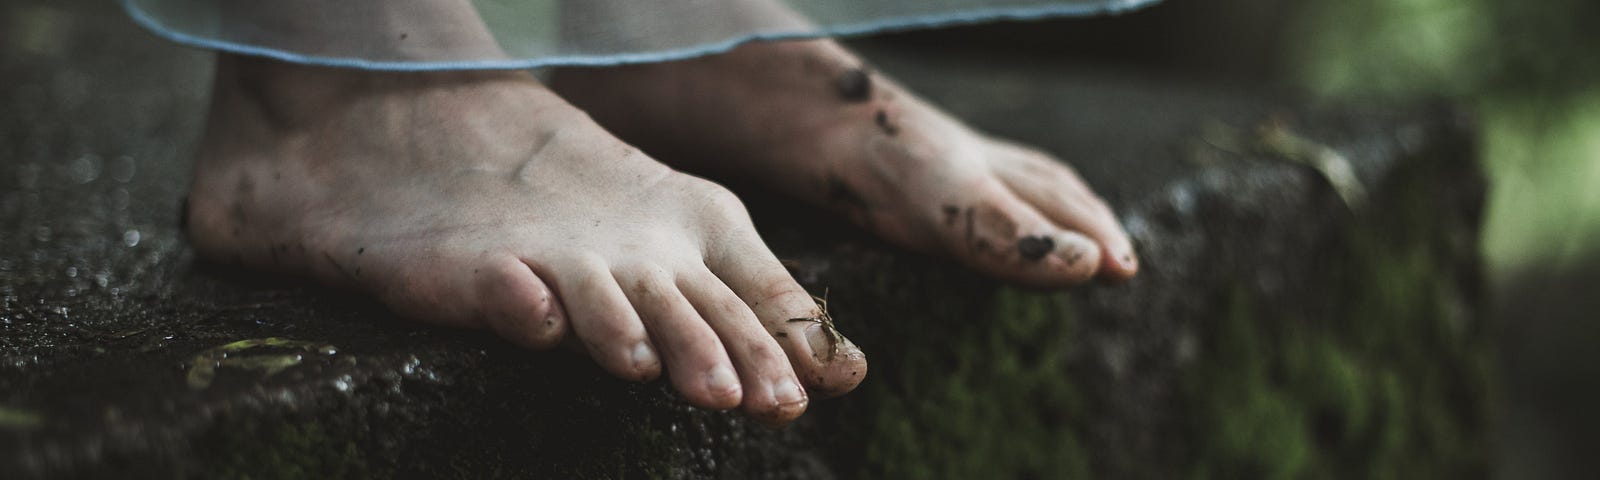 woman’s bare feet on the edge of a mossy, gray and green ledge